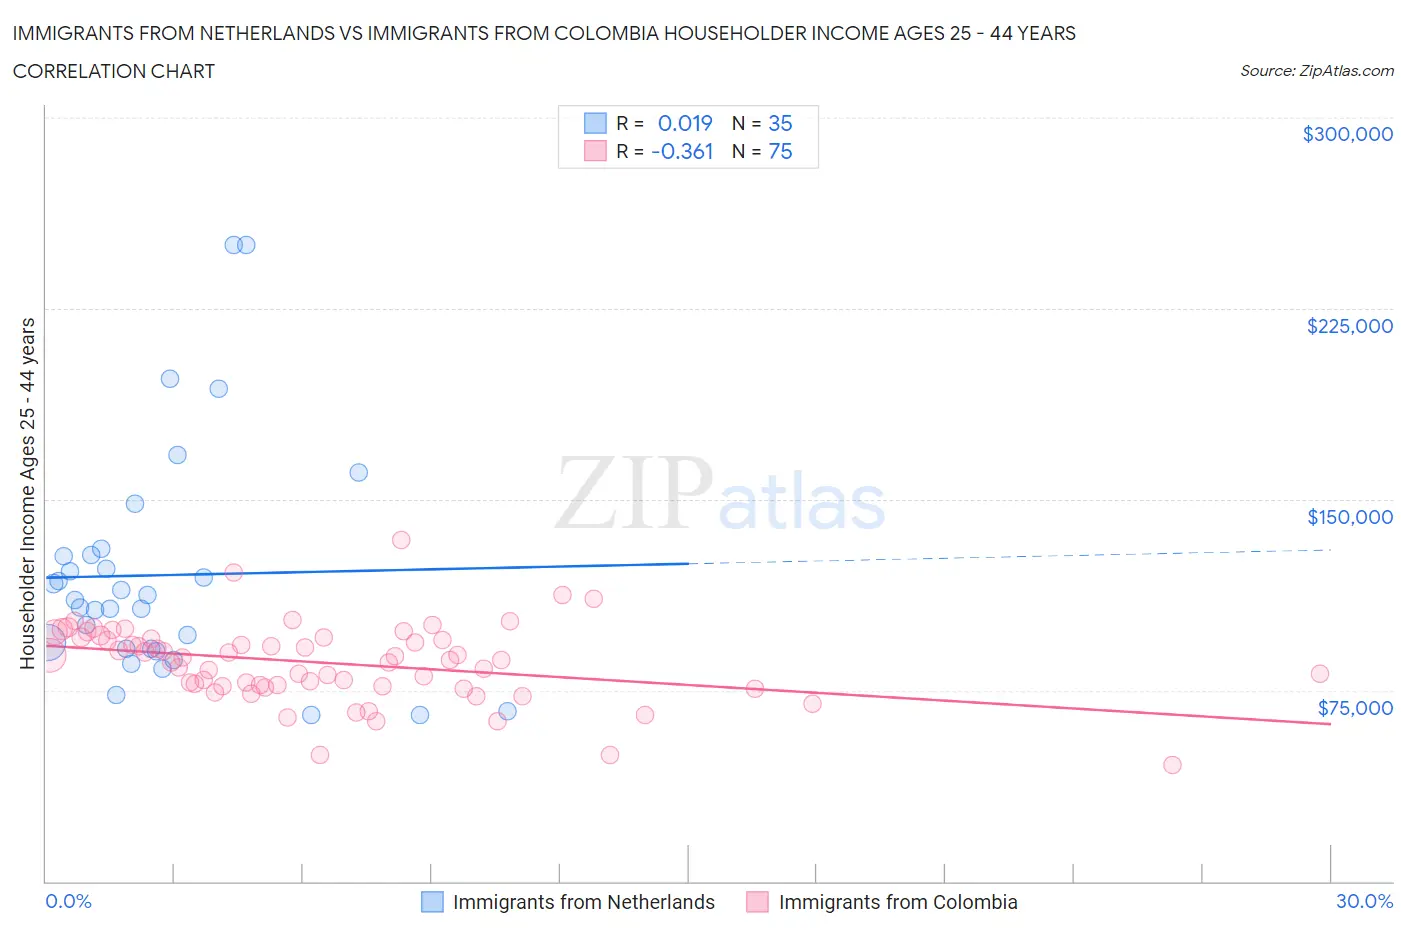 Immigrants from Netherlands vs Immigrants from Colombia Householder Income Ages 25 - 44 years